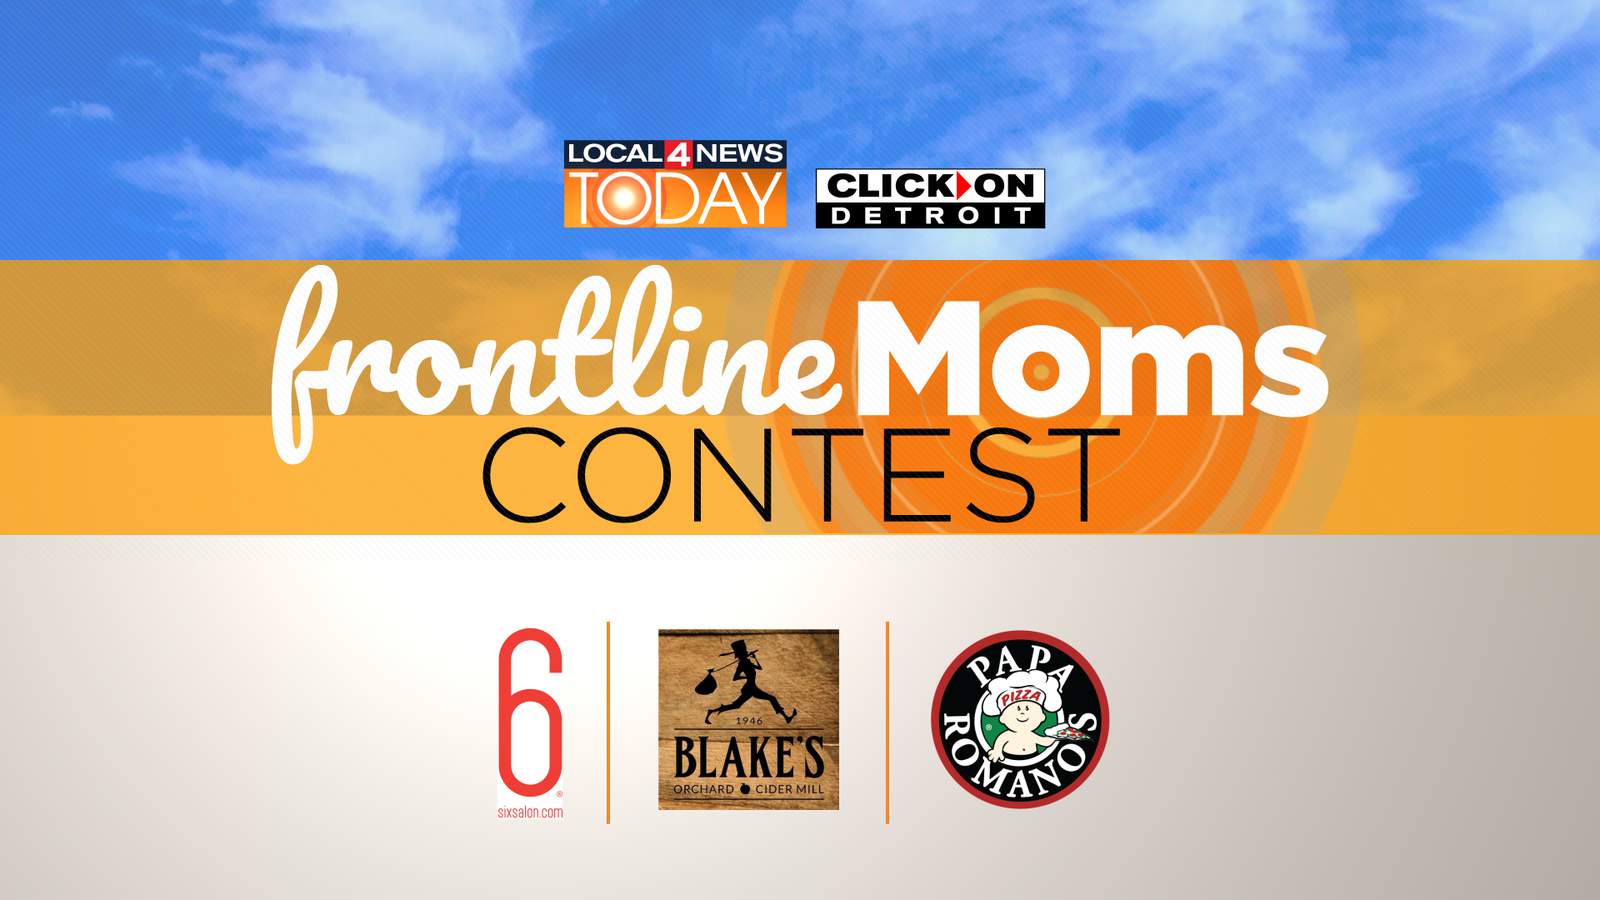 Enter Local 4 Today’s Frontline Moms Contest!